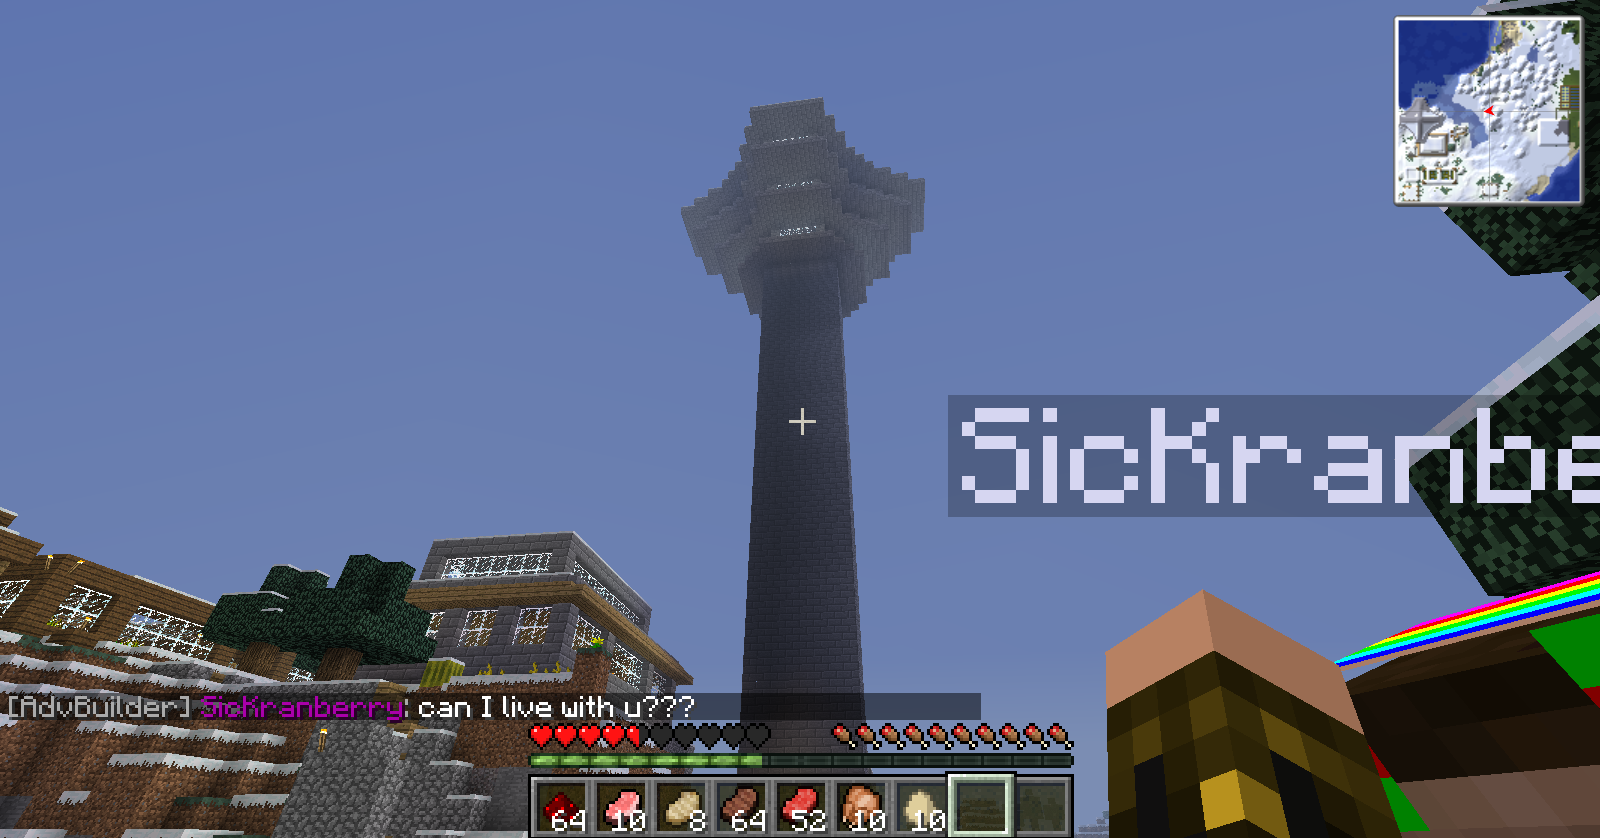 On My First Server<3